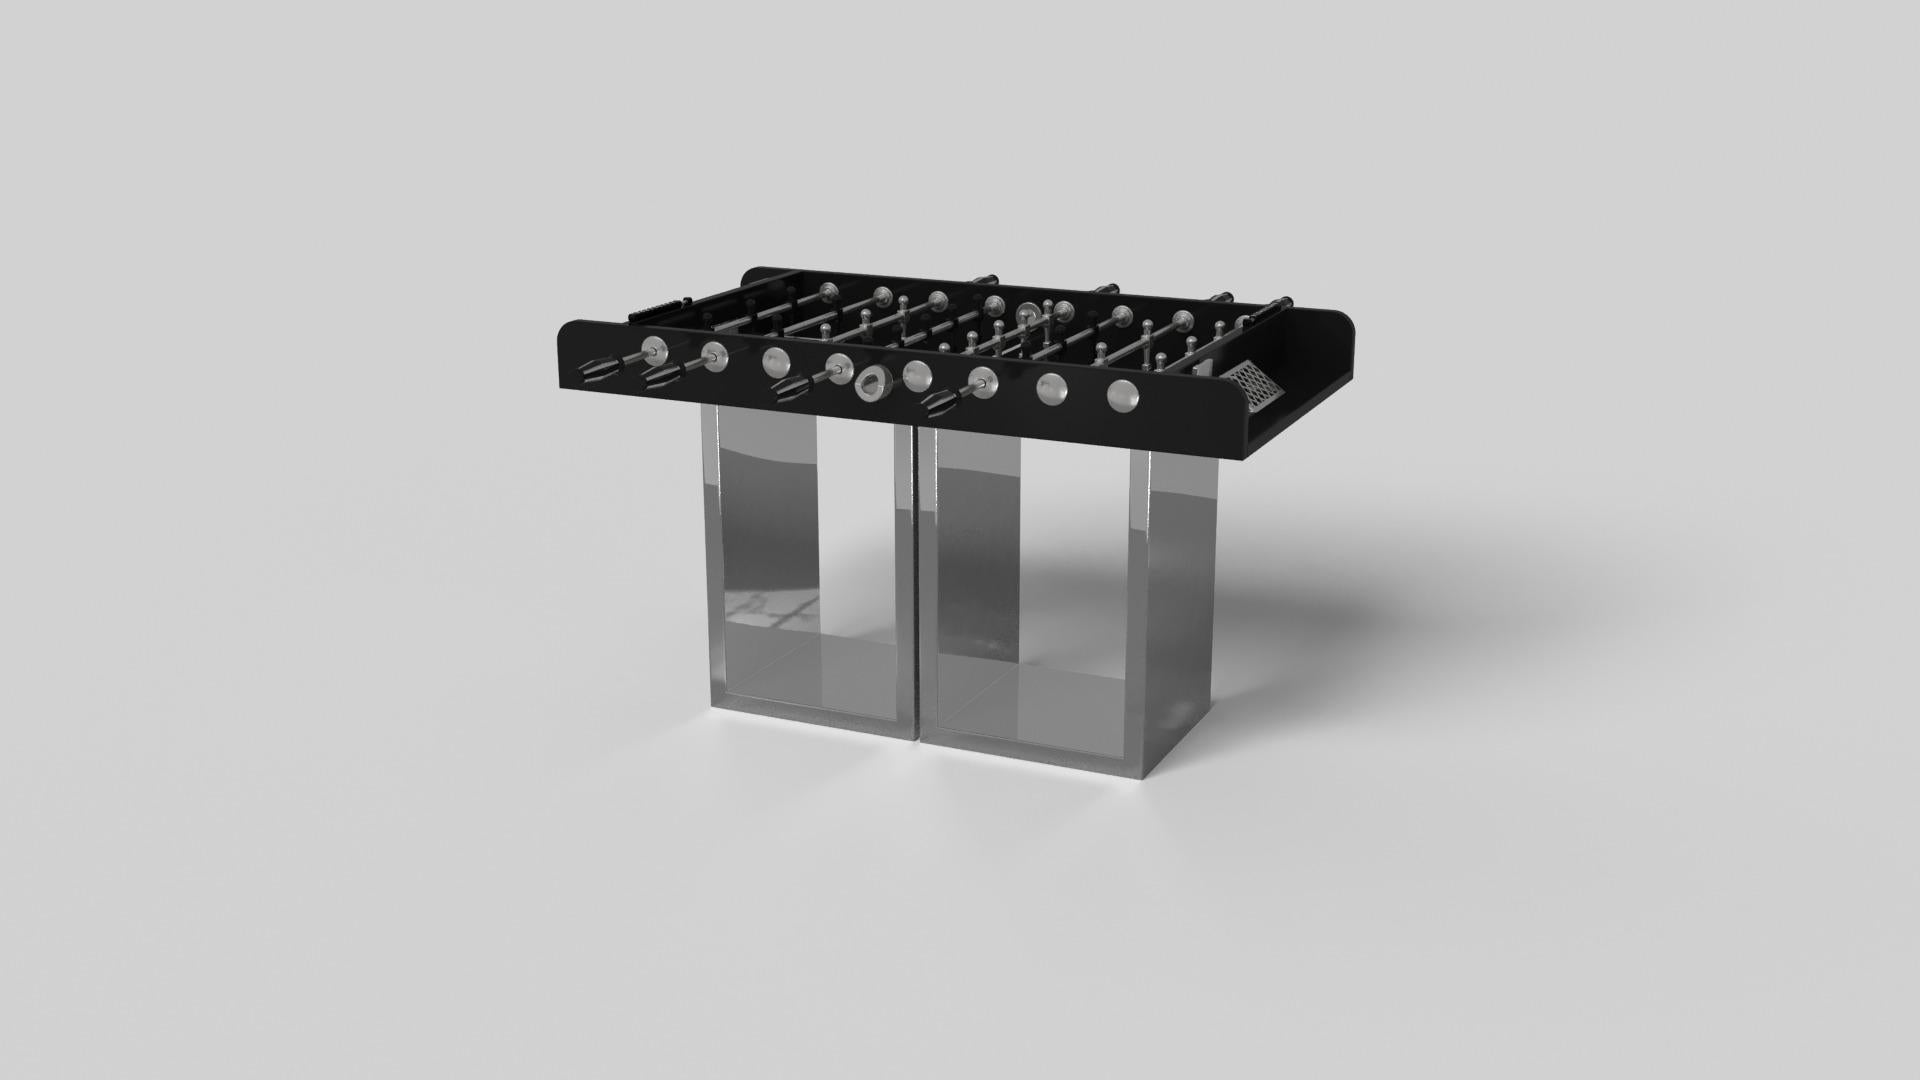 Supported by two rectangular open pedestals as the base, this handcrafted foosball table is modern and minimalistic with its combination of simple, geometric forms. Viewed from the front, the use of negative space is evident; viewed from the side,